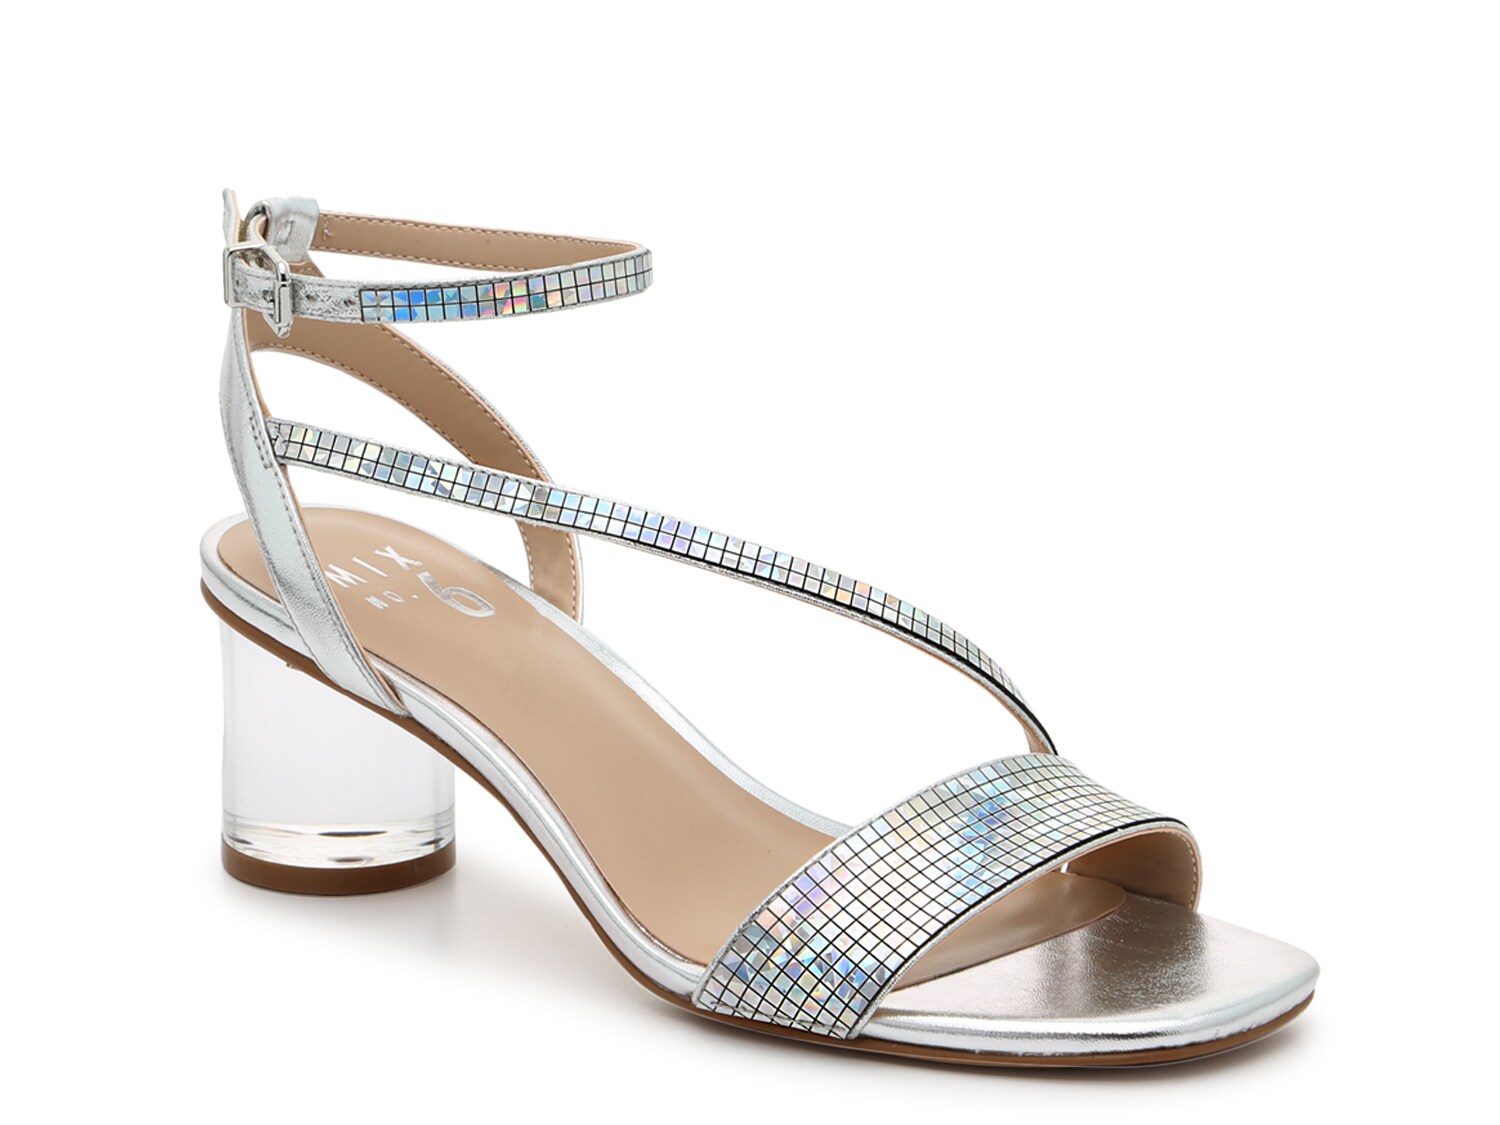 Mix No. 6 Carice Sandal - Free Shipping | DSW